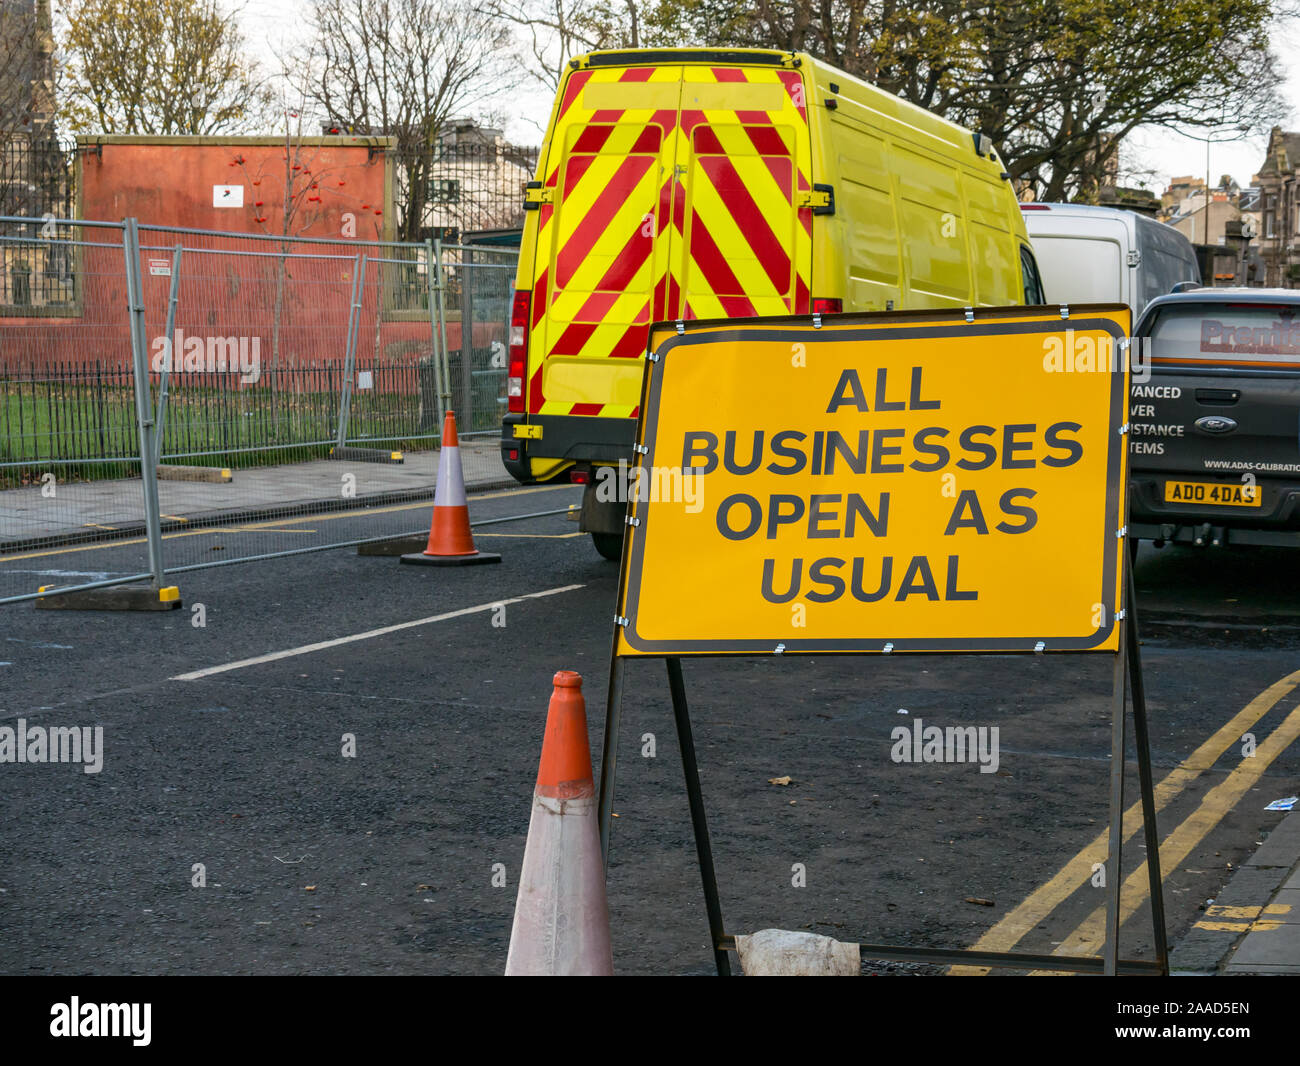 Leith, Edinburgh, Scotland, United Kingdom. 21st Nov, 2019. Trams to Newhaven work starts: Constitution Street is closed to traffic for the next 2-3 years to build the extension for Edinburgh's tram line from to Newhaven, with 8 more stops over 2.91 miles. Barriers along the road with an All Businesses Open as Usual road sign. The work is being undertaken by SFN (Sacyr Farrans Neopul) and MUS (Morrison Utility Services) Stock Photo